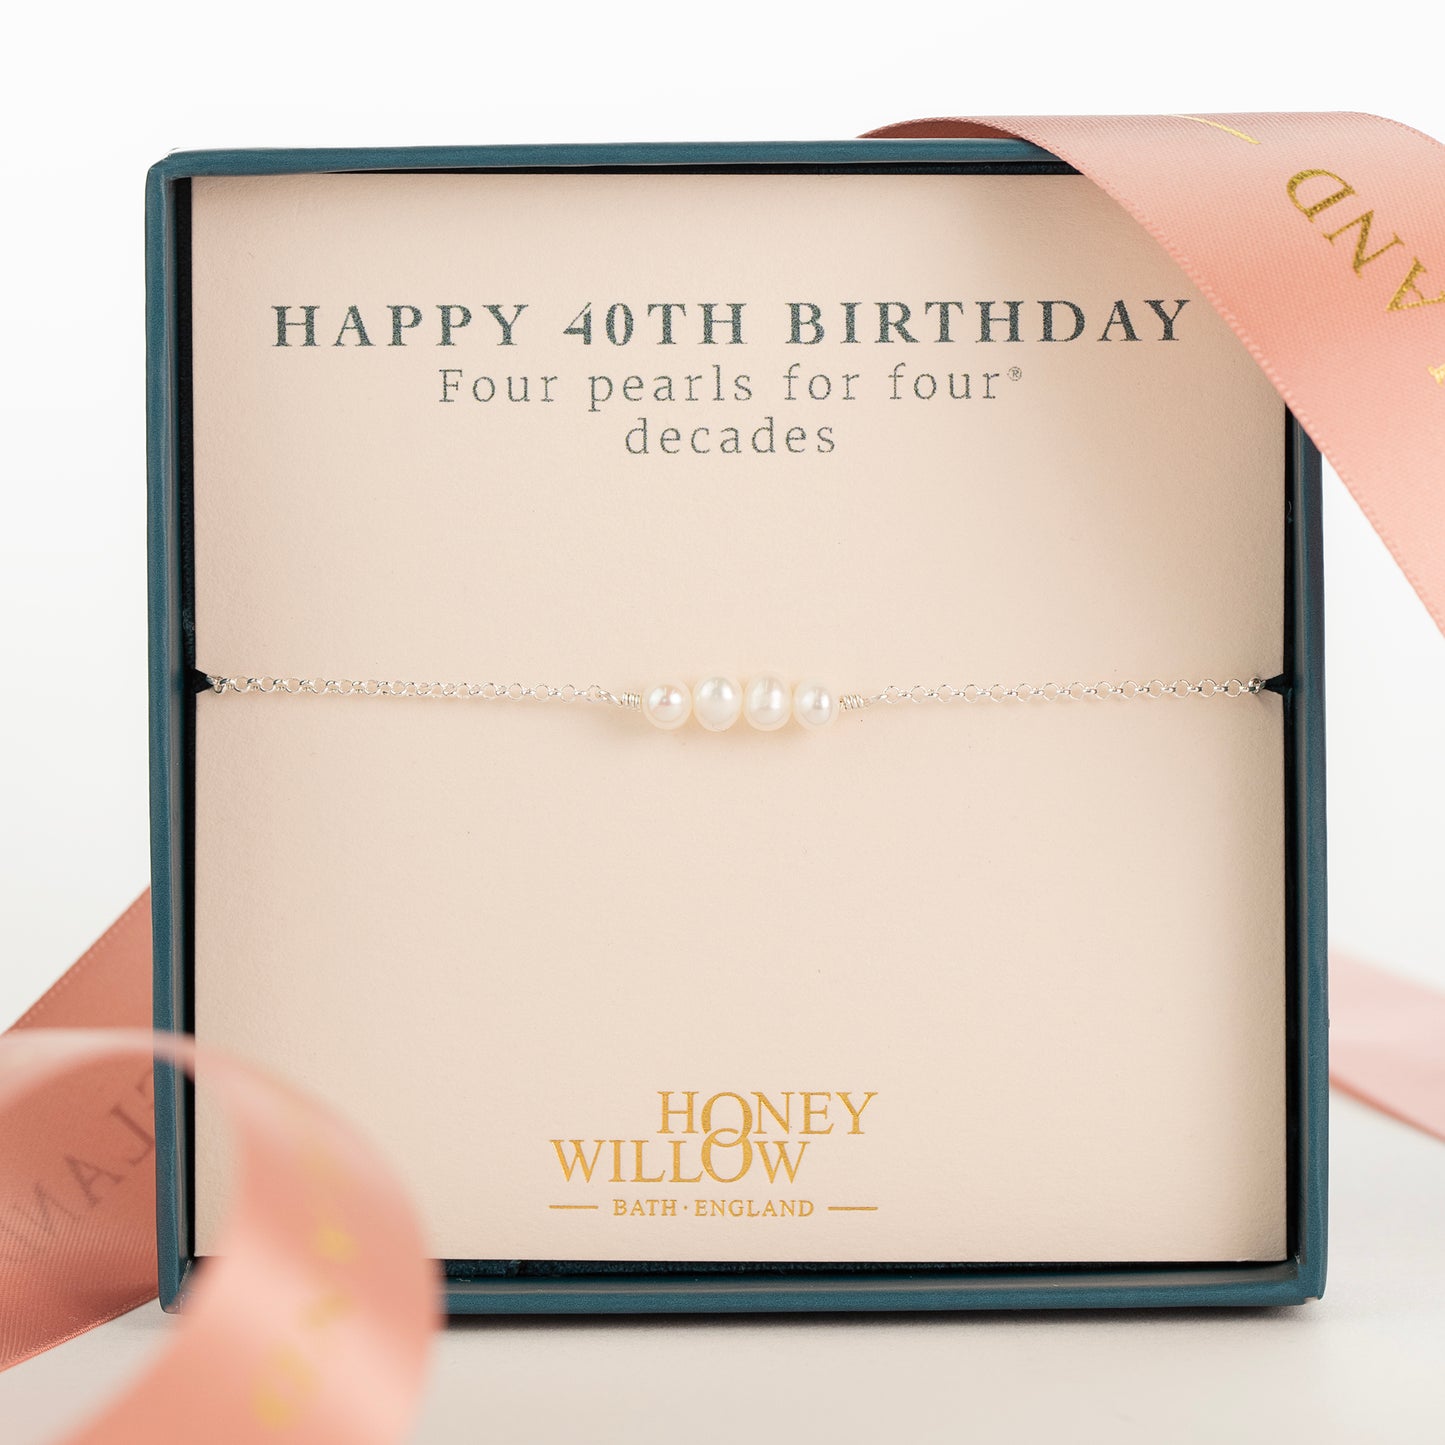 40th Birthday Bracelet - 4 Pearls for 4 Decades - Silver & Gold